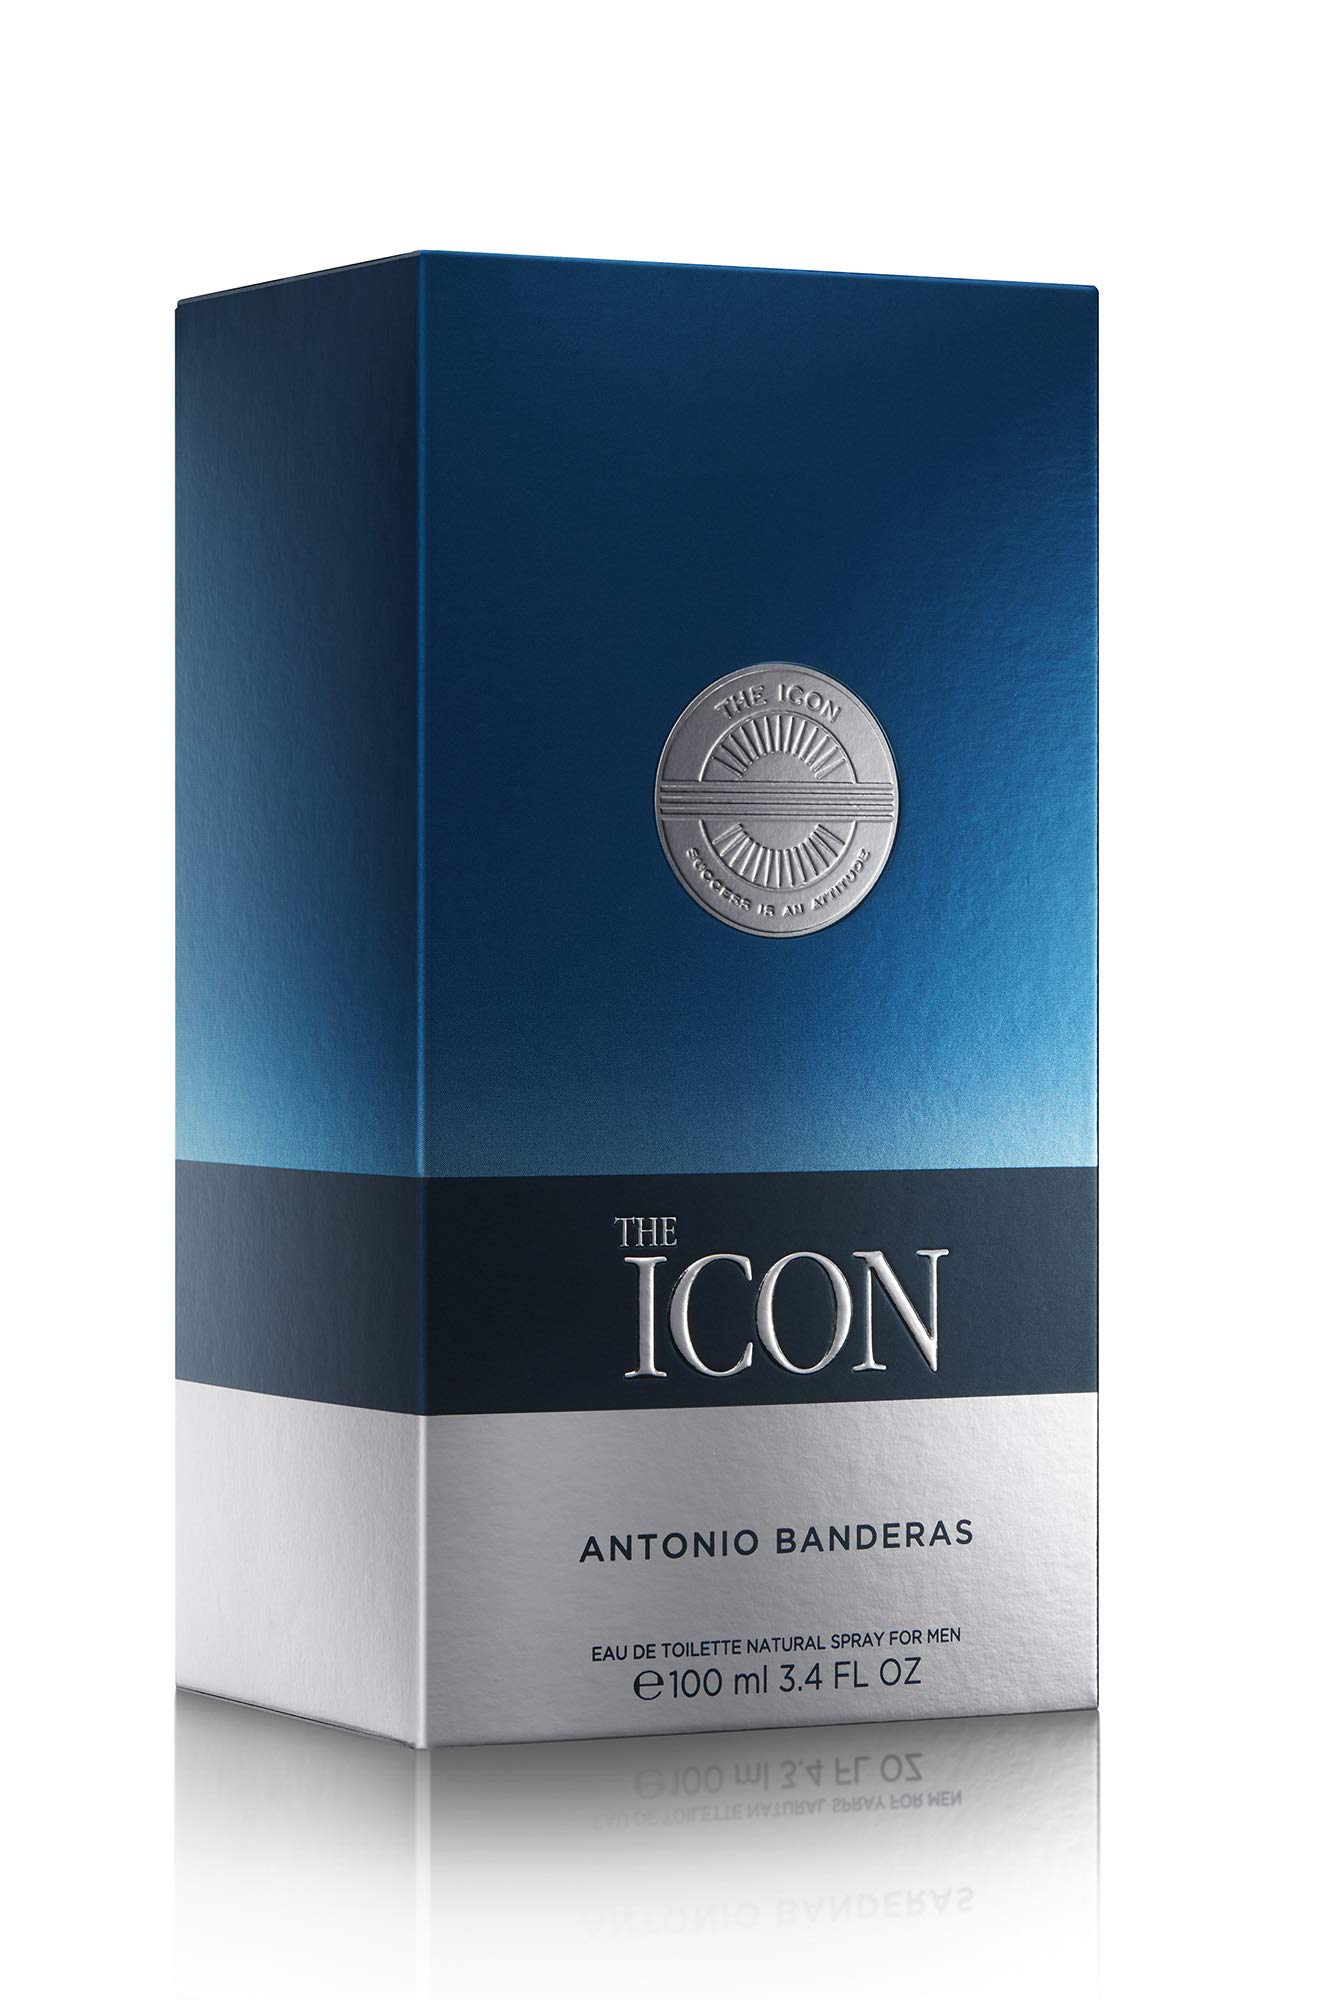 Antonio Banderas The Icon Eau De Perfume For Men - Long Lasting - Virile, Elegant, Trendy And Sexy Scent - Wood, Amber, And Sandalwood Notes - Ideal For Special Events - 3.4 Fl Oz